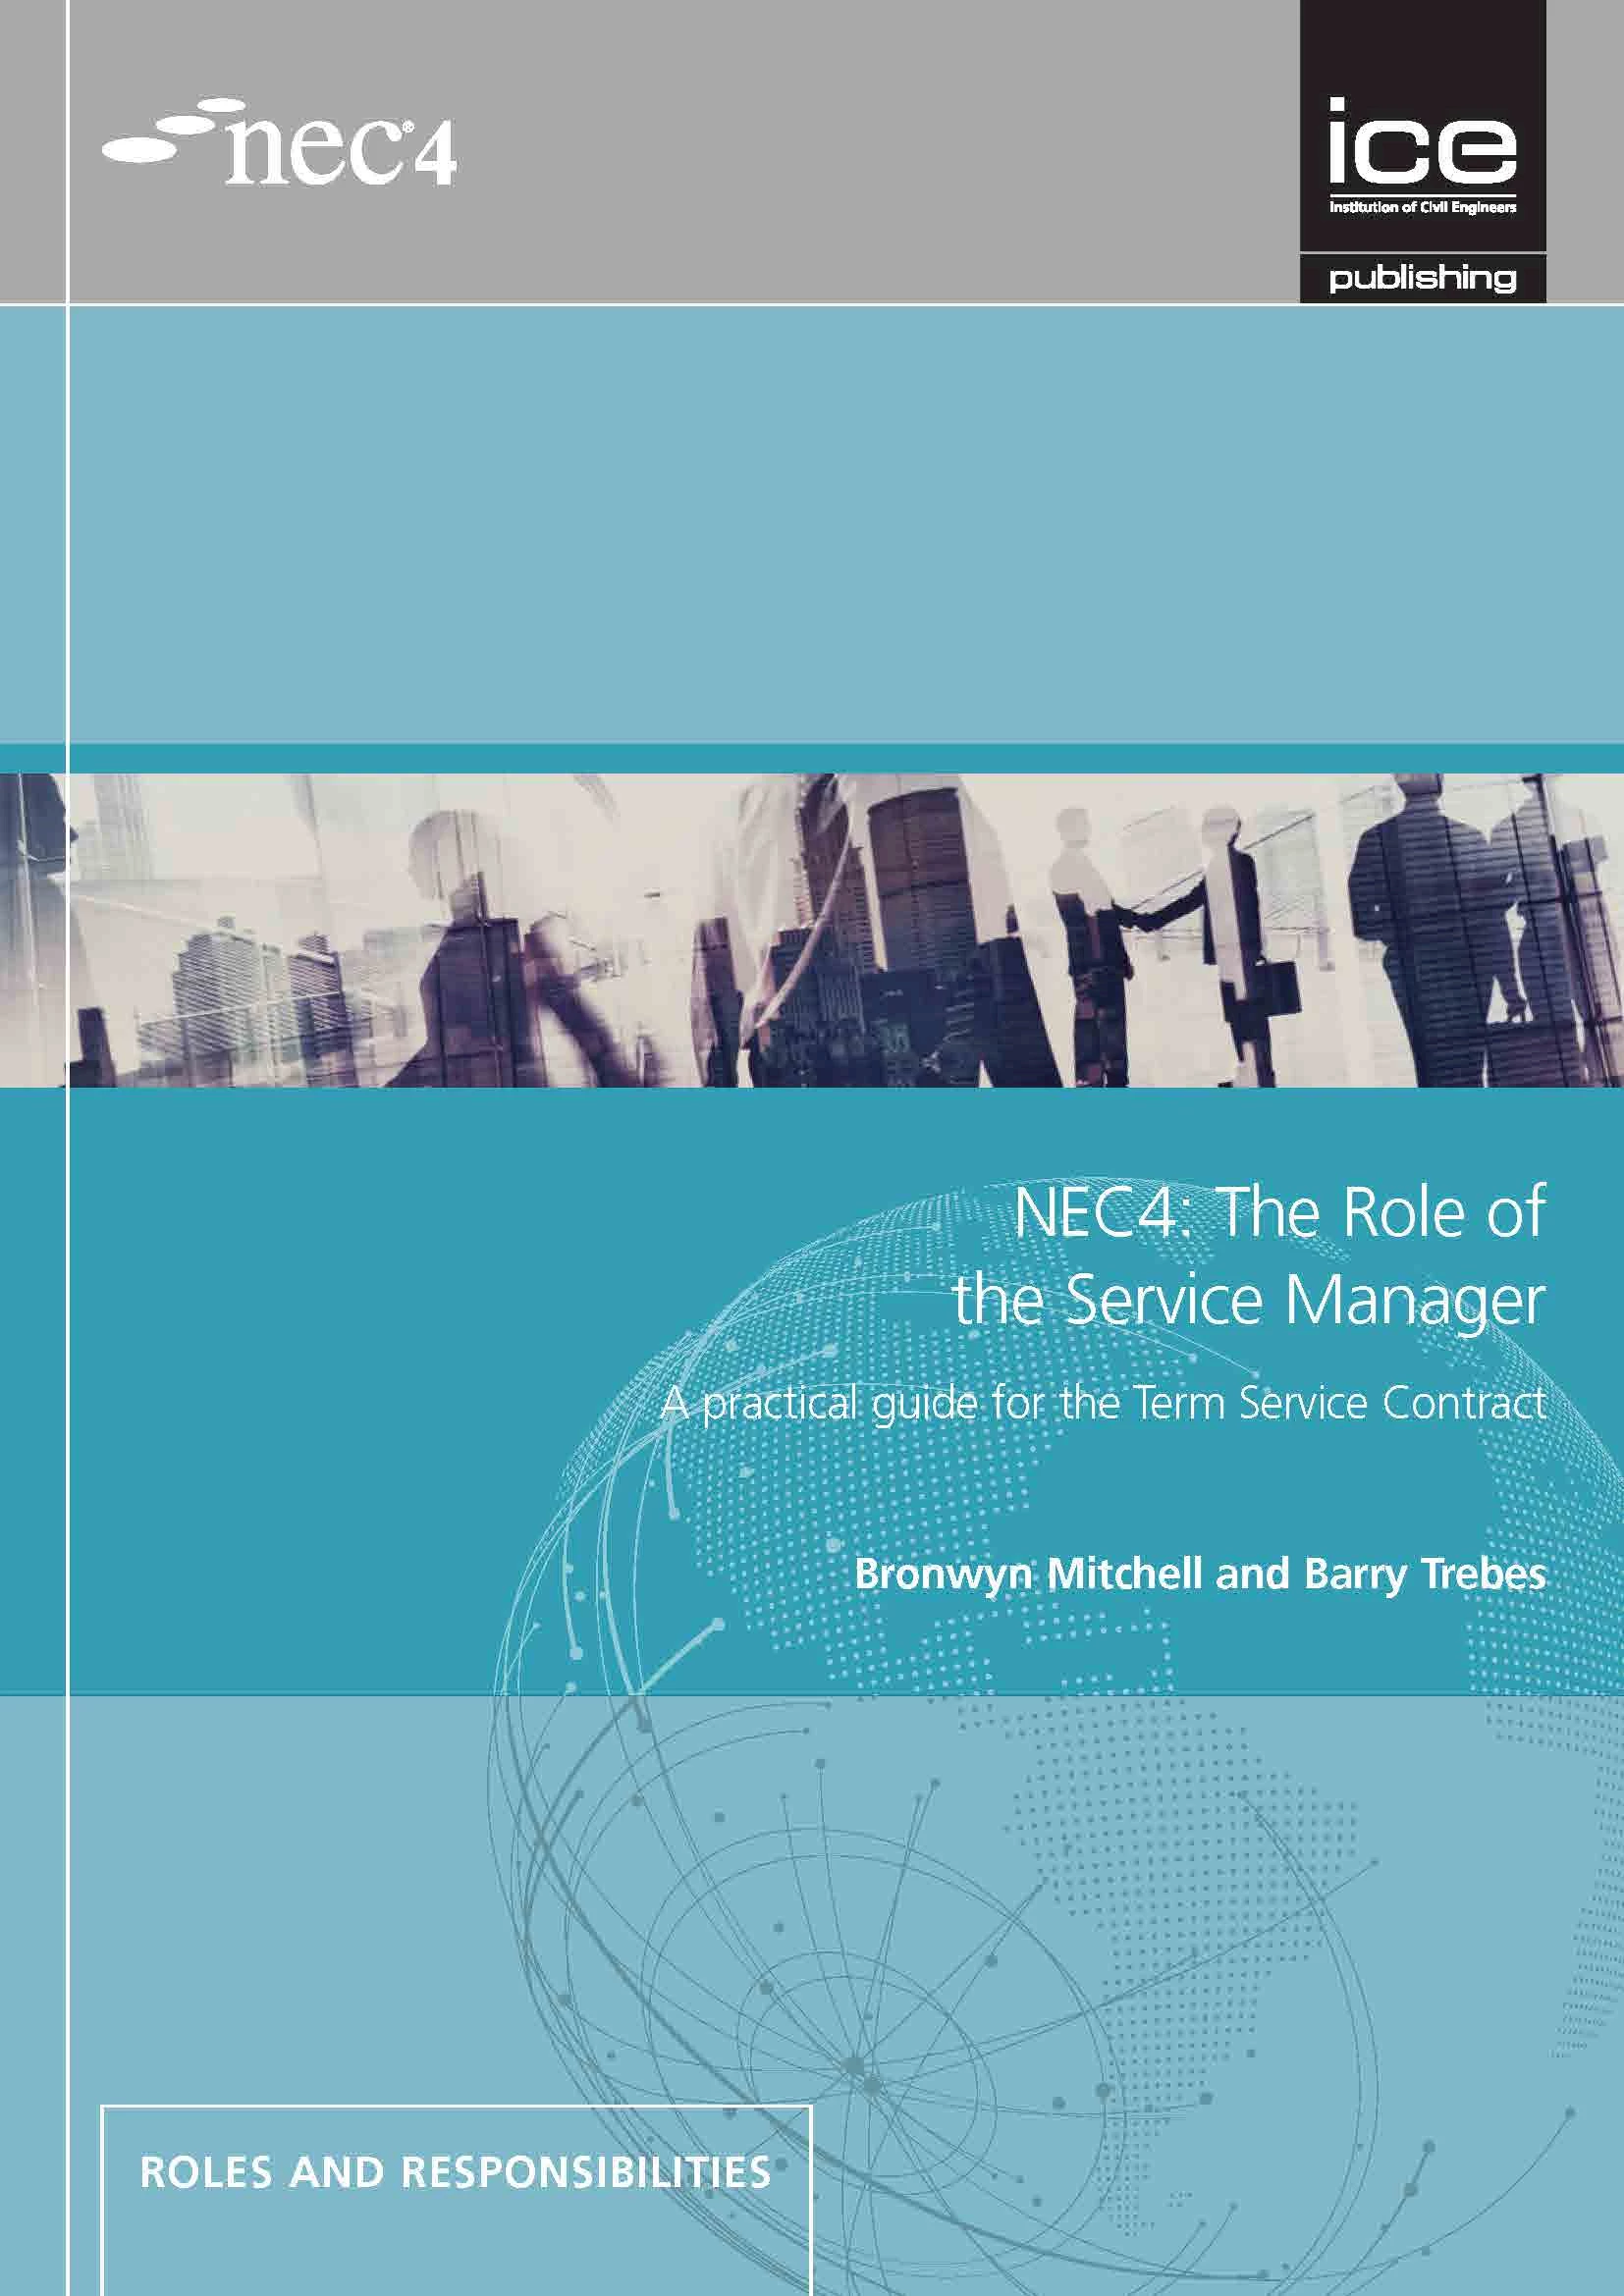 NEC4: The Role of the Service Manager